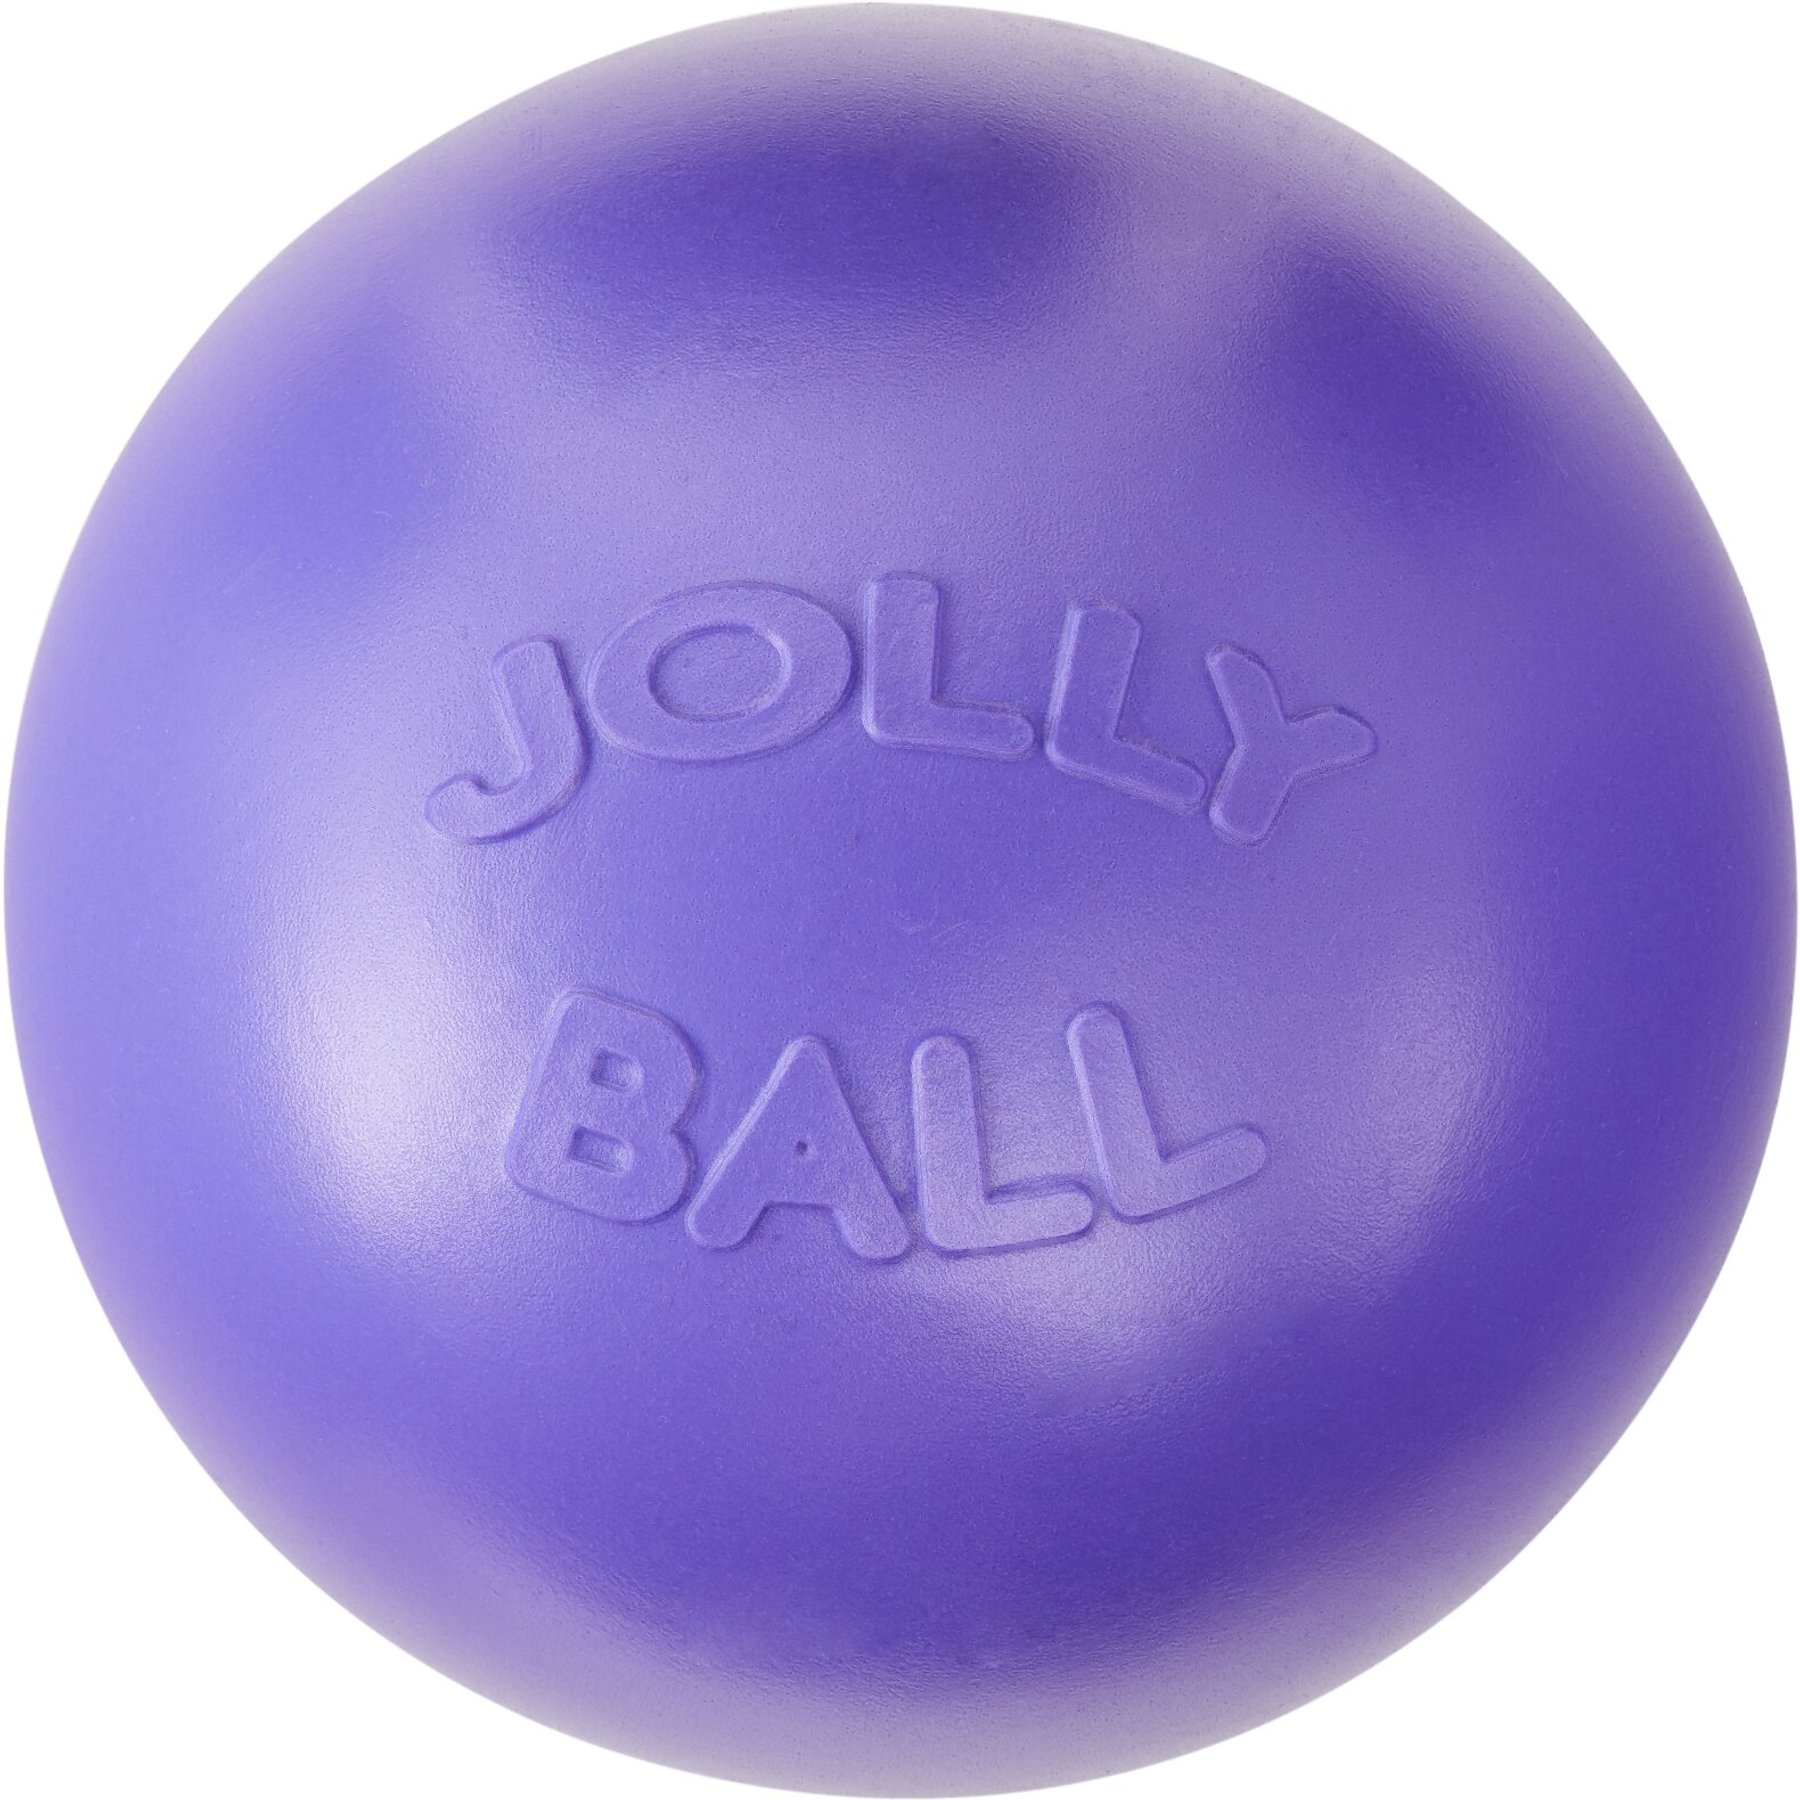 Cheap Toy Ball for Pets - Interactive Dog Toys Jolly Ball Herding Ball for  Dogs - Dual Mode Design